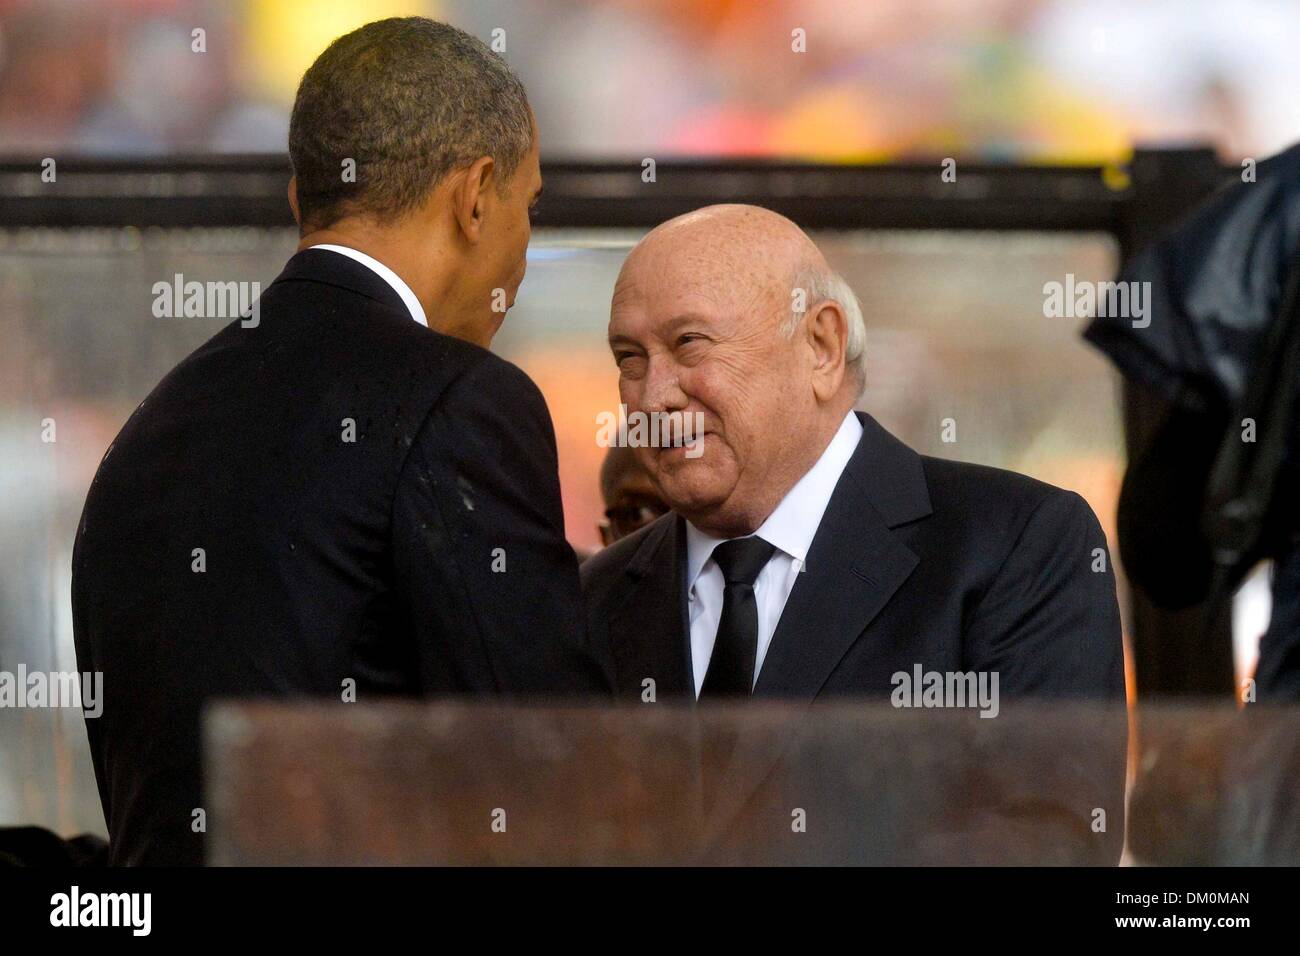 Johannesburg, South Africa. 10th Dec, 2013.  US President Barak Obama and FW De Klerk attending Nelson Mandela's public Memorial Service at the FNB stadium on December 10, 2013, in Johannesburg, South Africa. The Father of the Nation passed away quietly on the evening of December 5, 2013 at his home in Houghton with family. He will be buried in Qunu for the official State funeral on December 15, 2013. Credit:  Gallo images/Alamy Live News Stock Photo